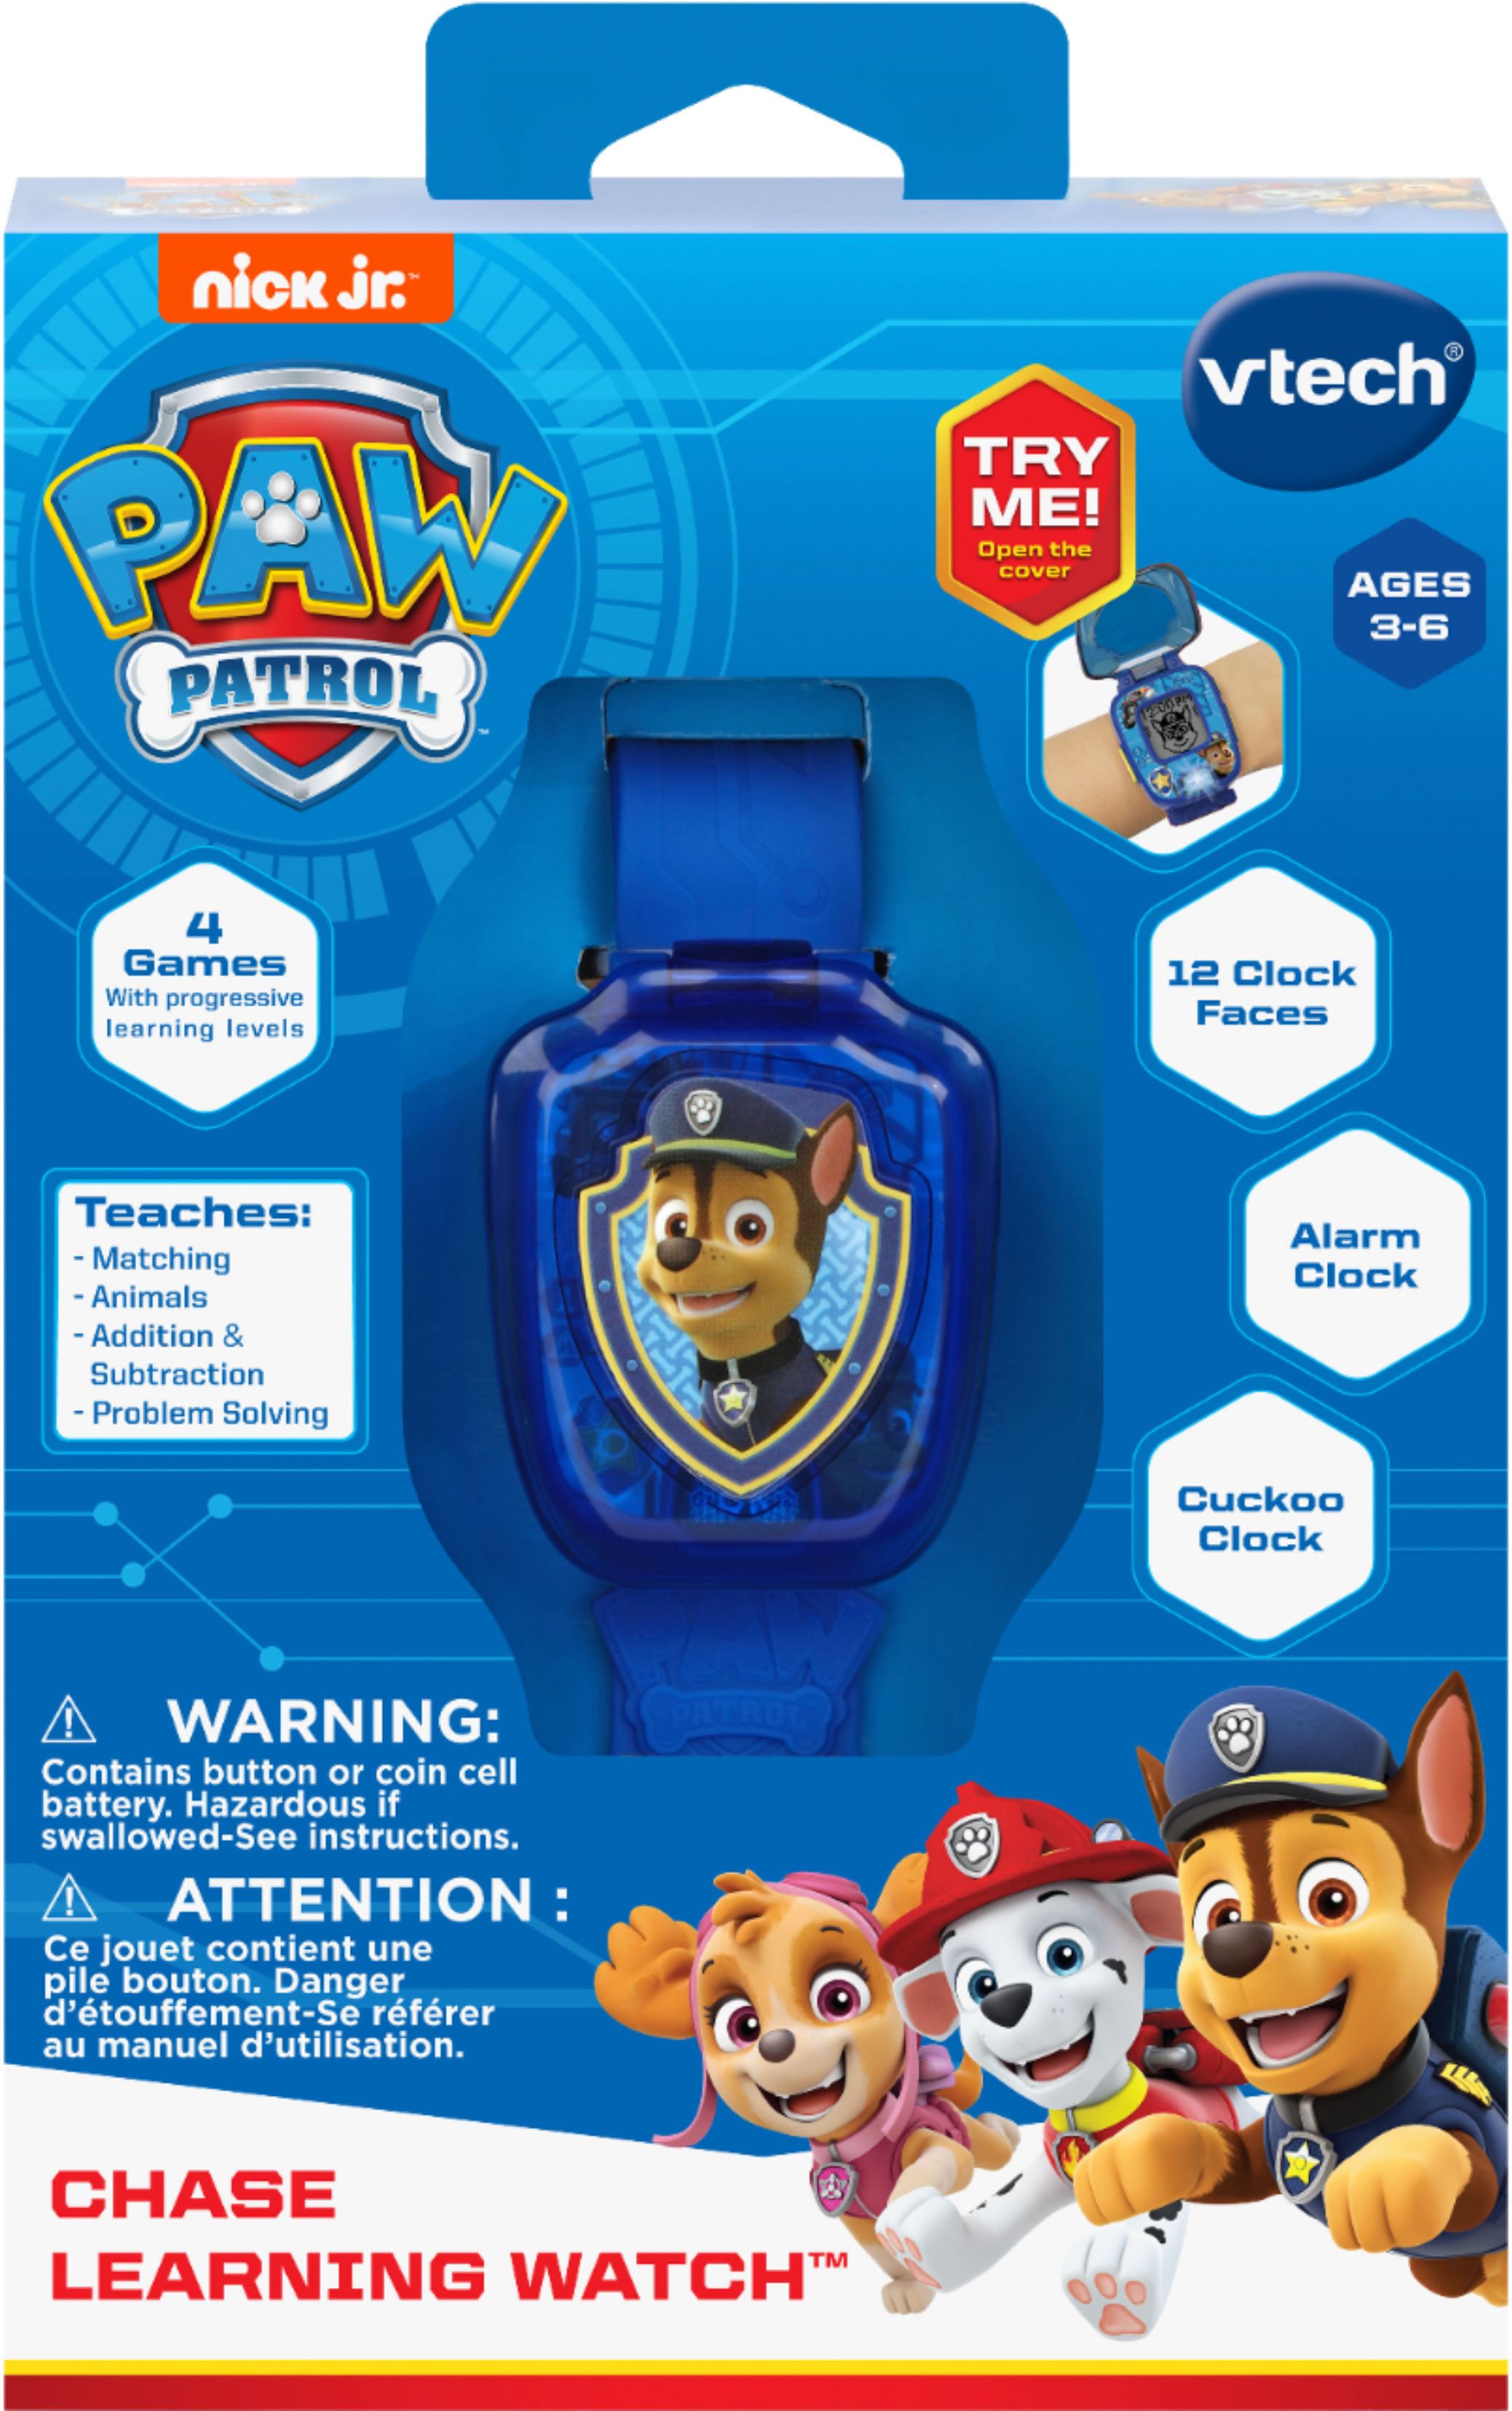 Buy: VTech PAW Patrol Chase Learning Watch Blue 80-199500